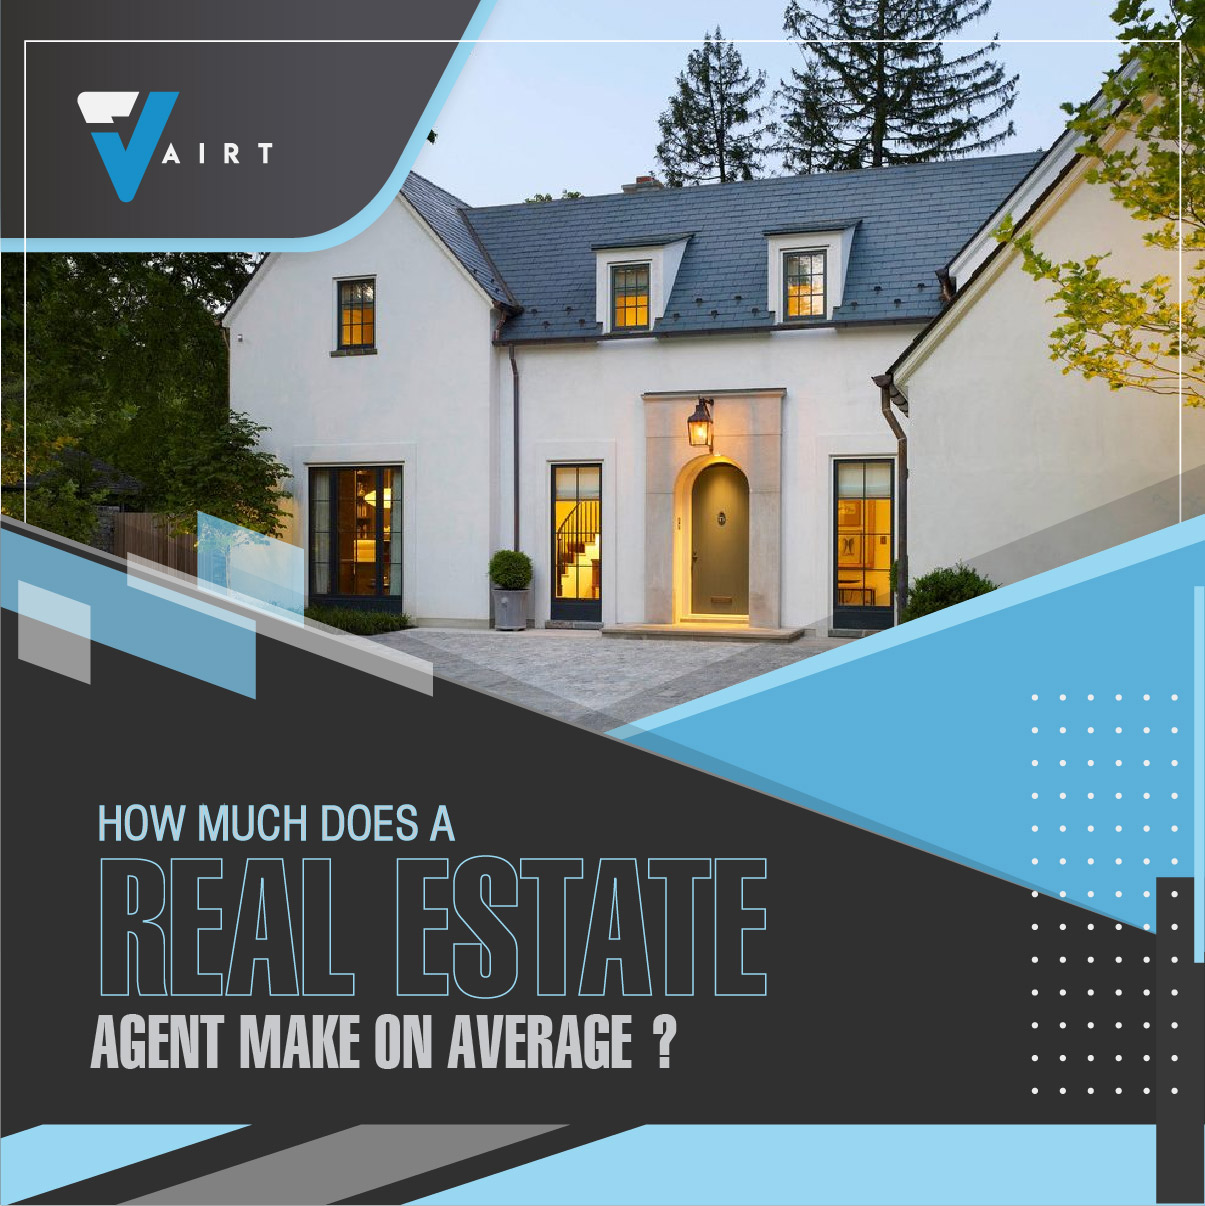 How Much Does a Real Estate Agent Make on Average